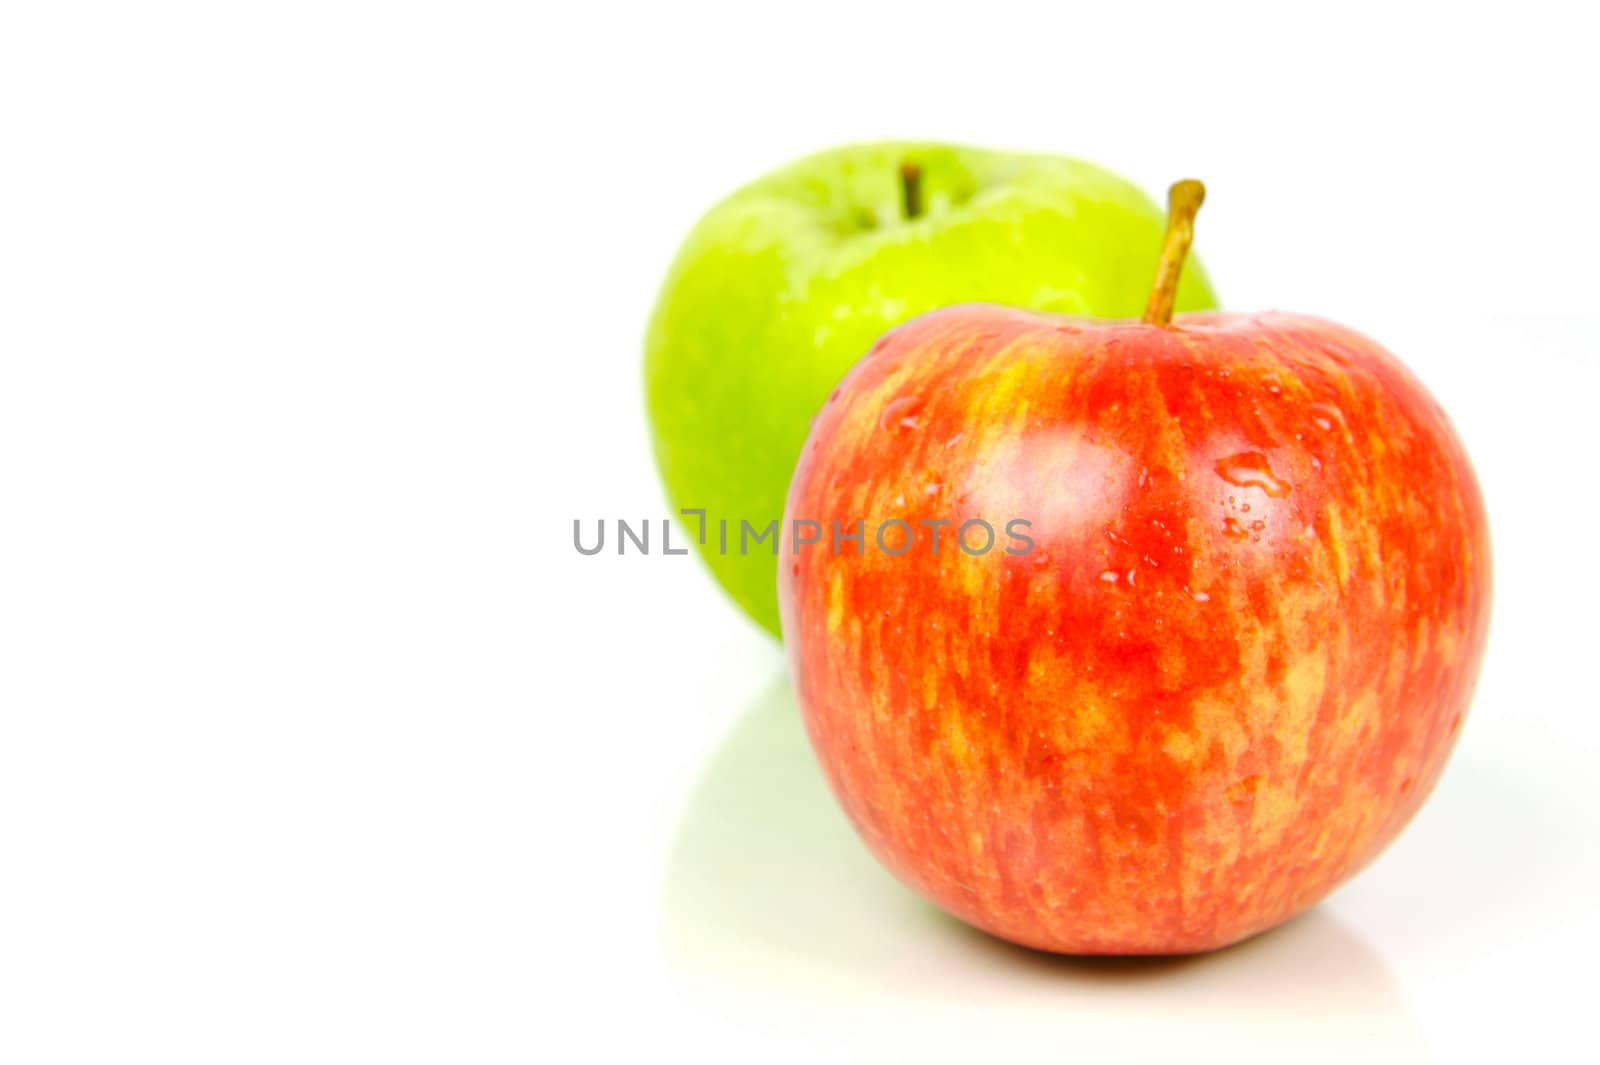 Red and green apples isolated against a white background